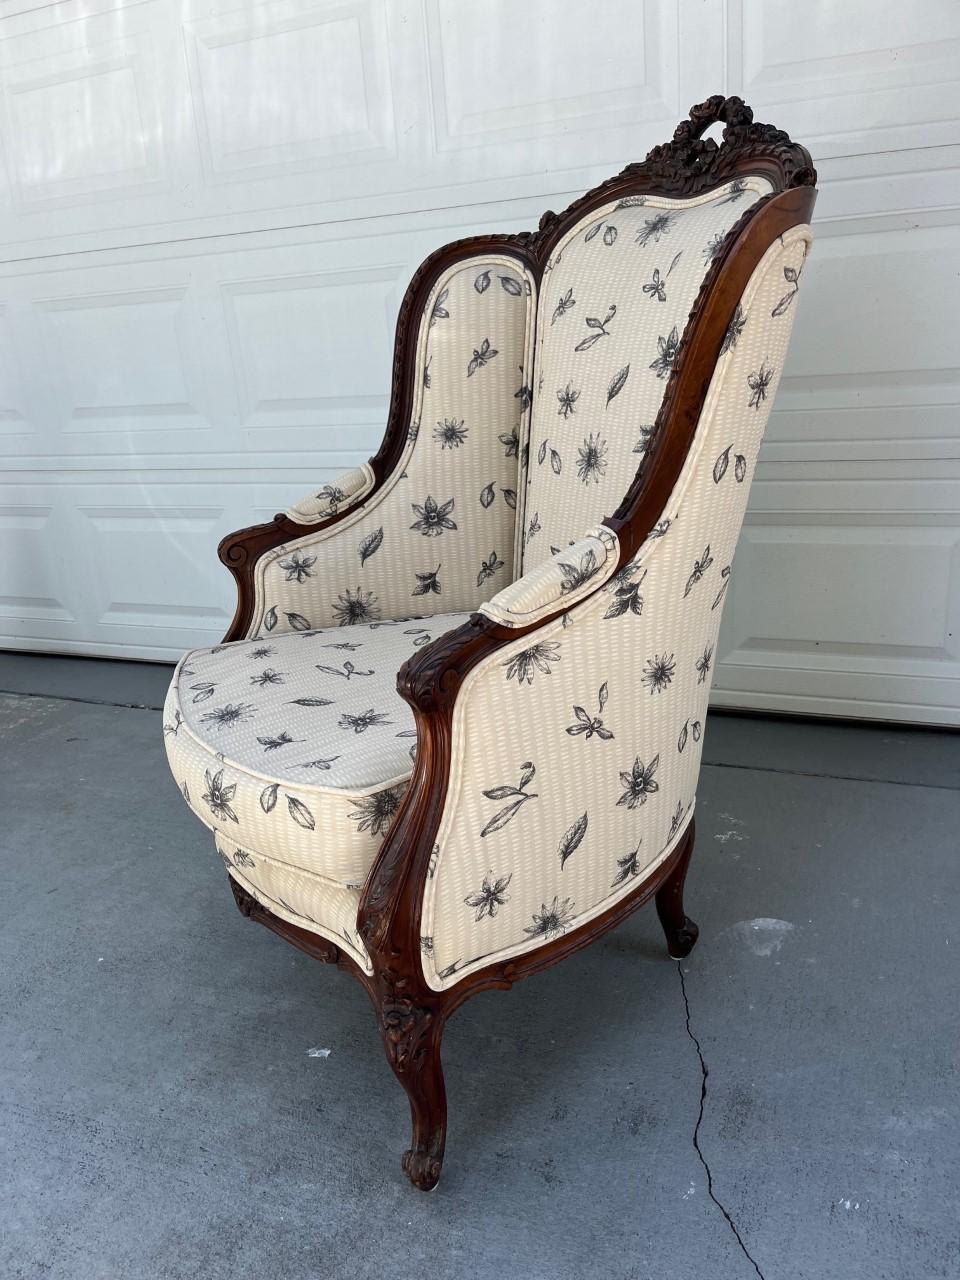 French Louis XV style walnut wingback Bergere chair, early 20th century

Large and well proportioned finely carved walnut wingback bergere armchair. The sturdy frame is decorated with finely hand carved delicate floral details. It is raised on four